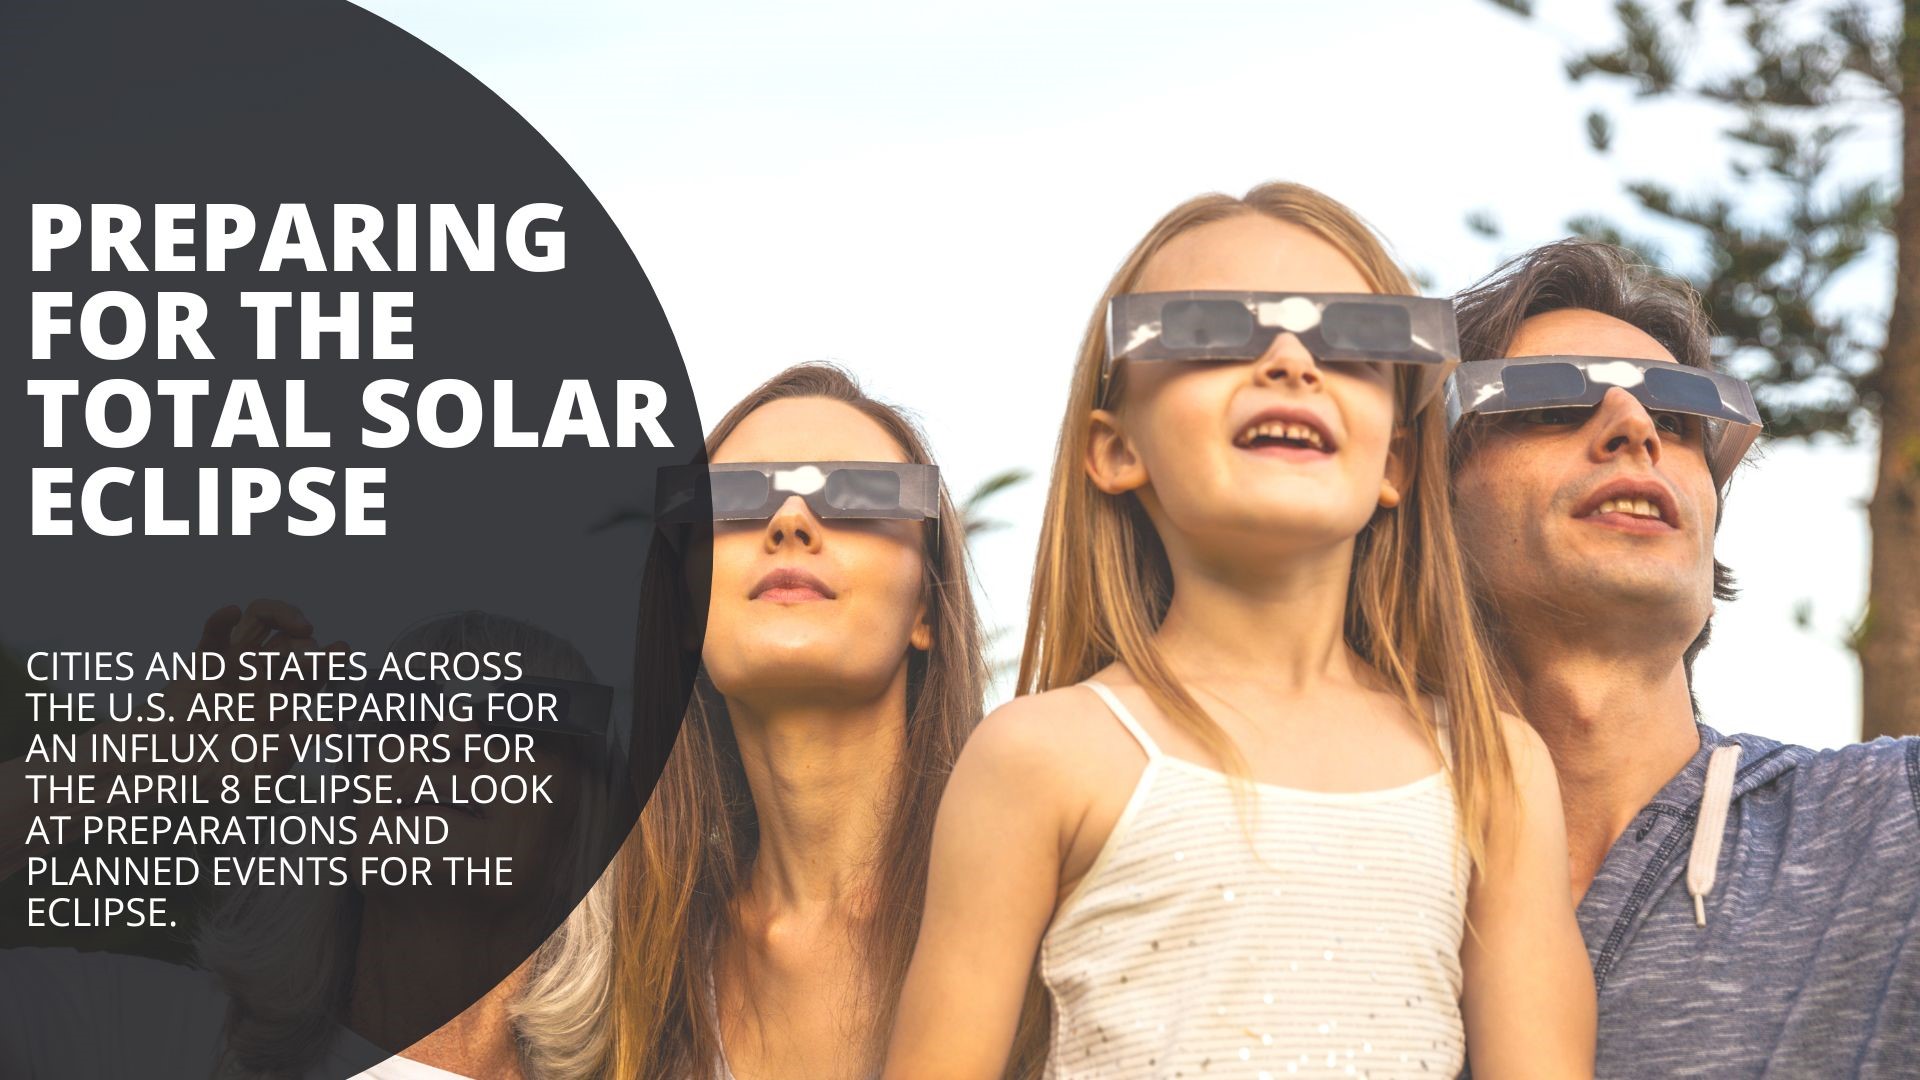 How to safely view the solar eclipse in April